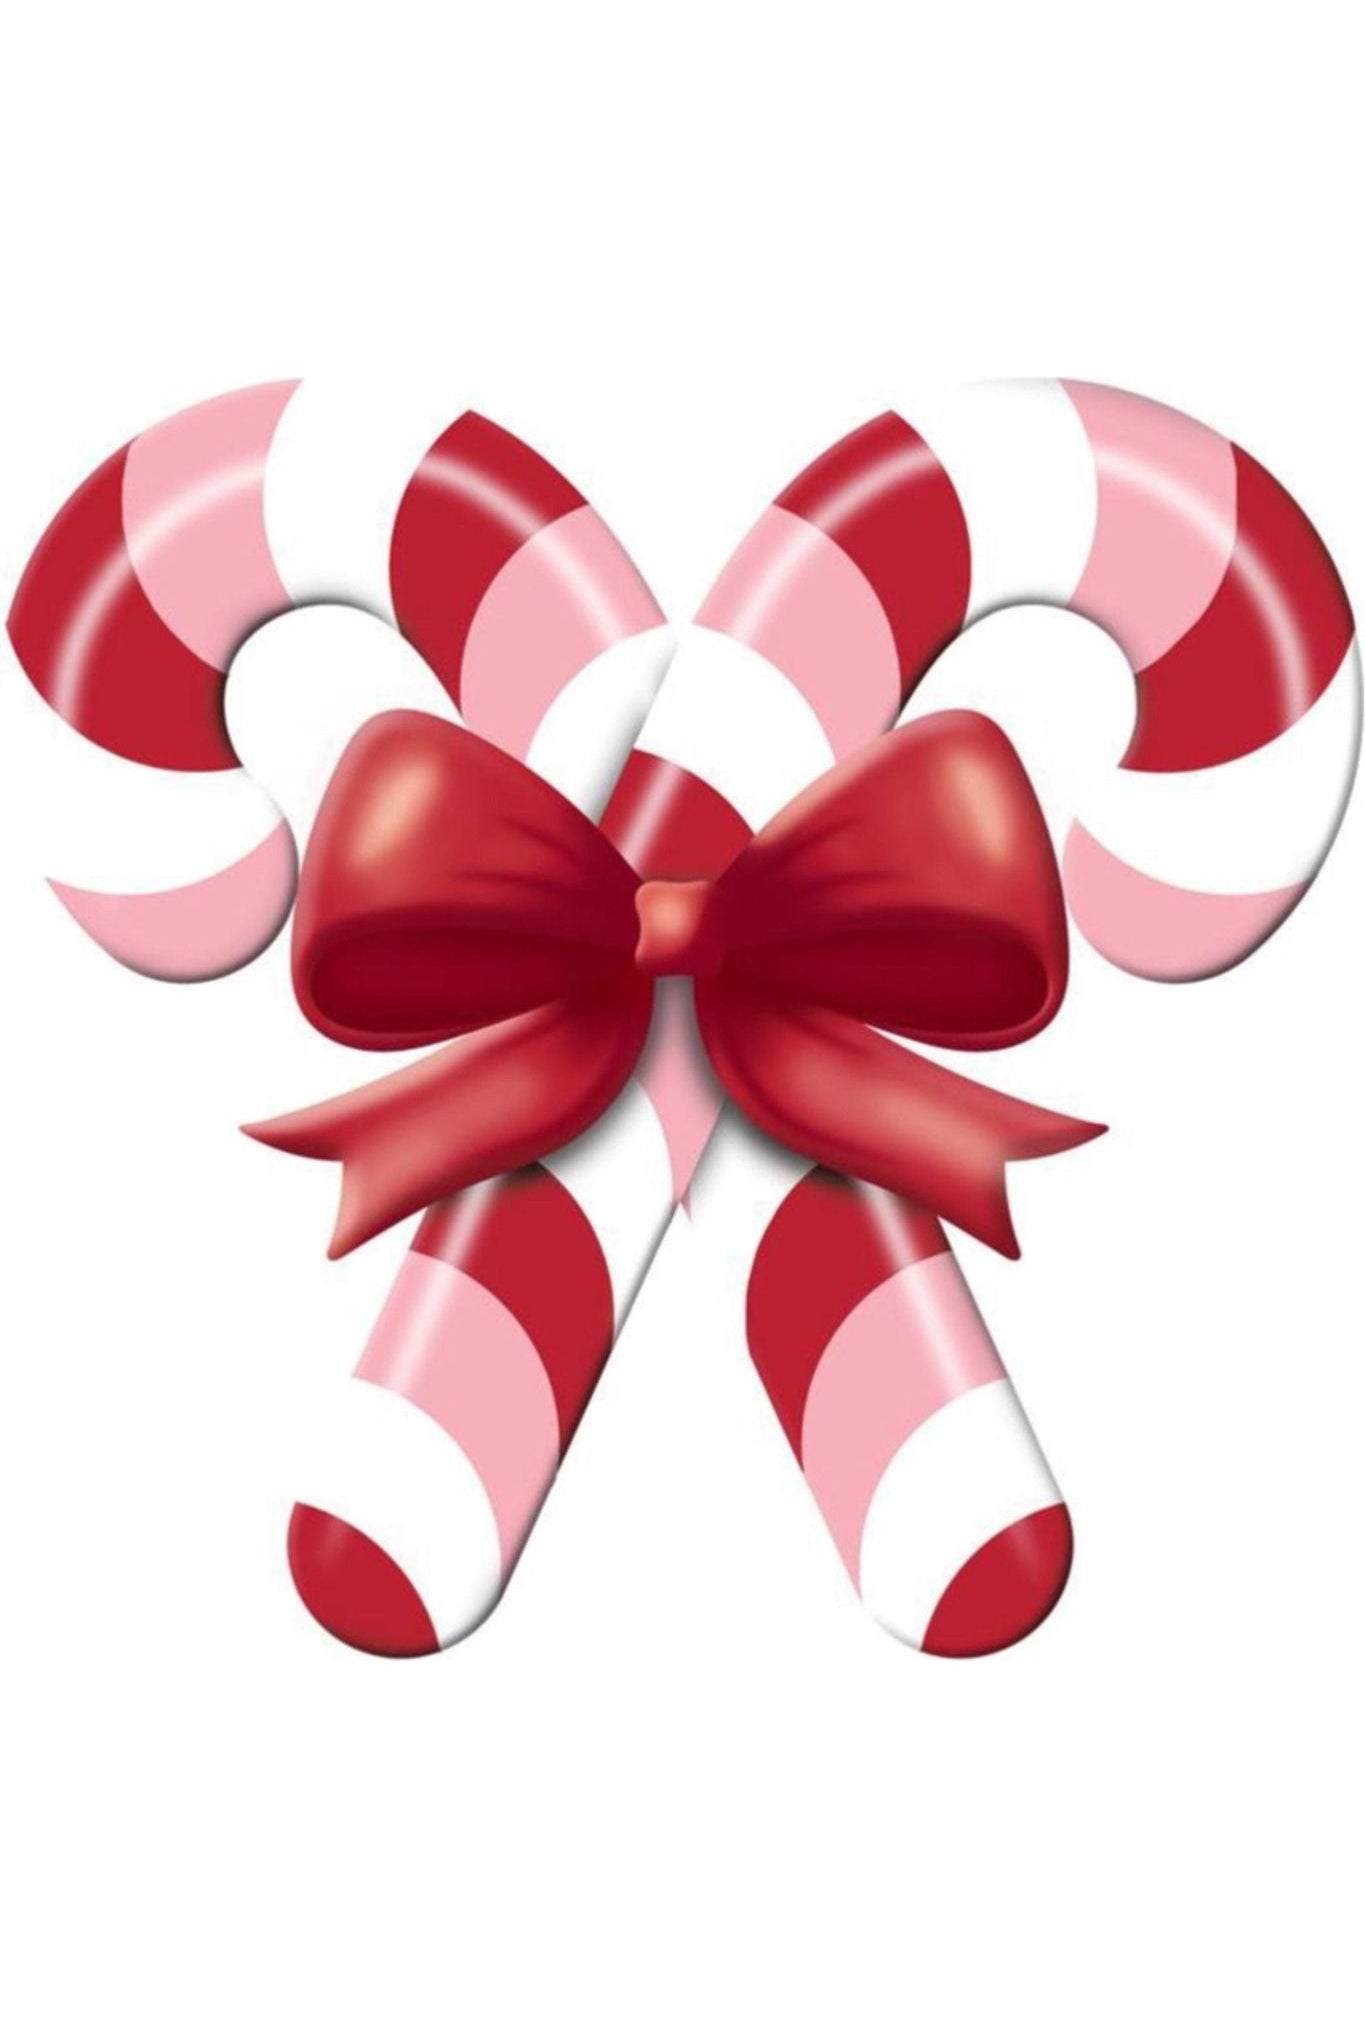 Shop For 13" Metal Embossed Candy Canes: Pink/Red MD136593